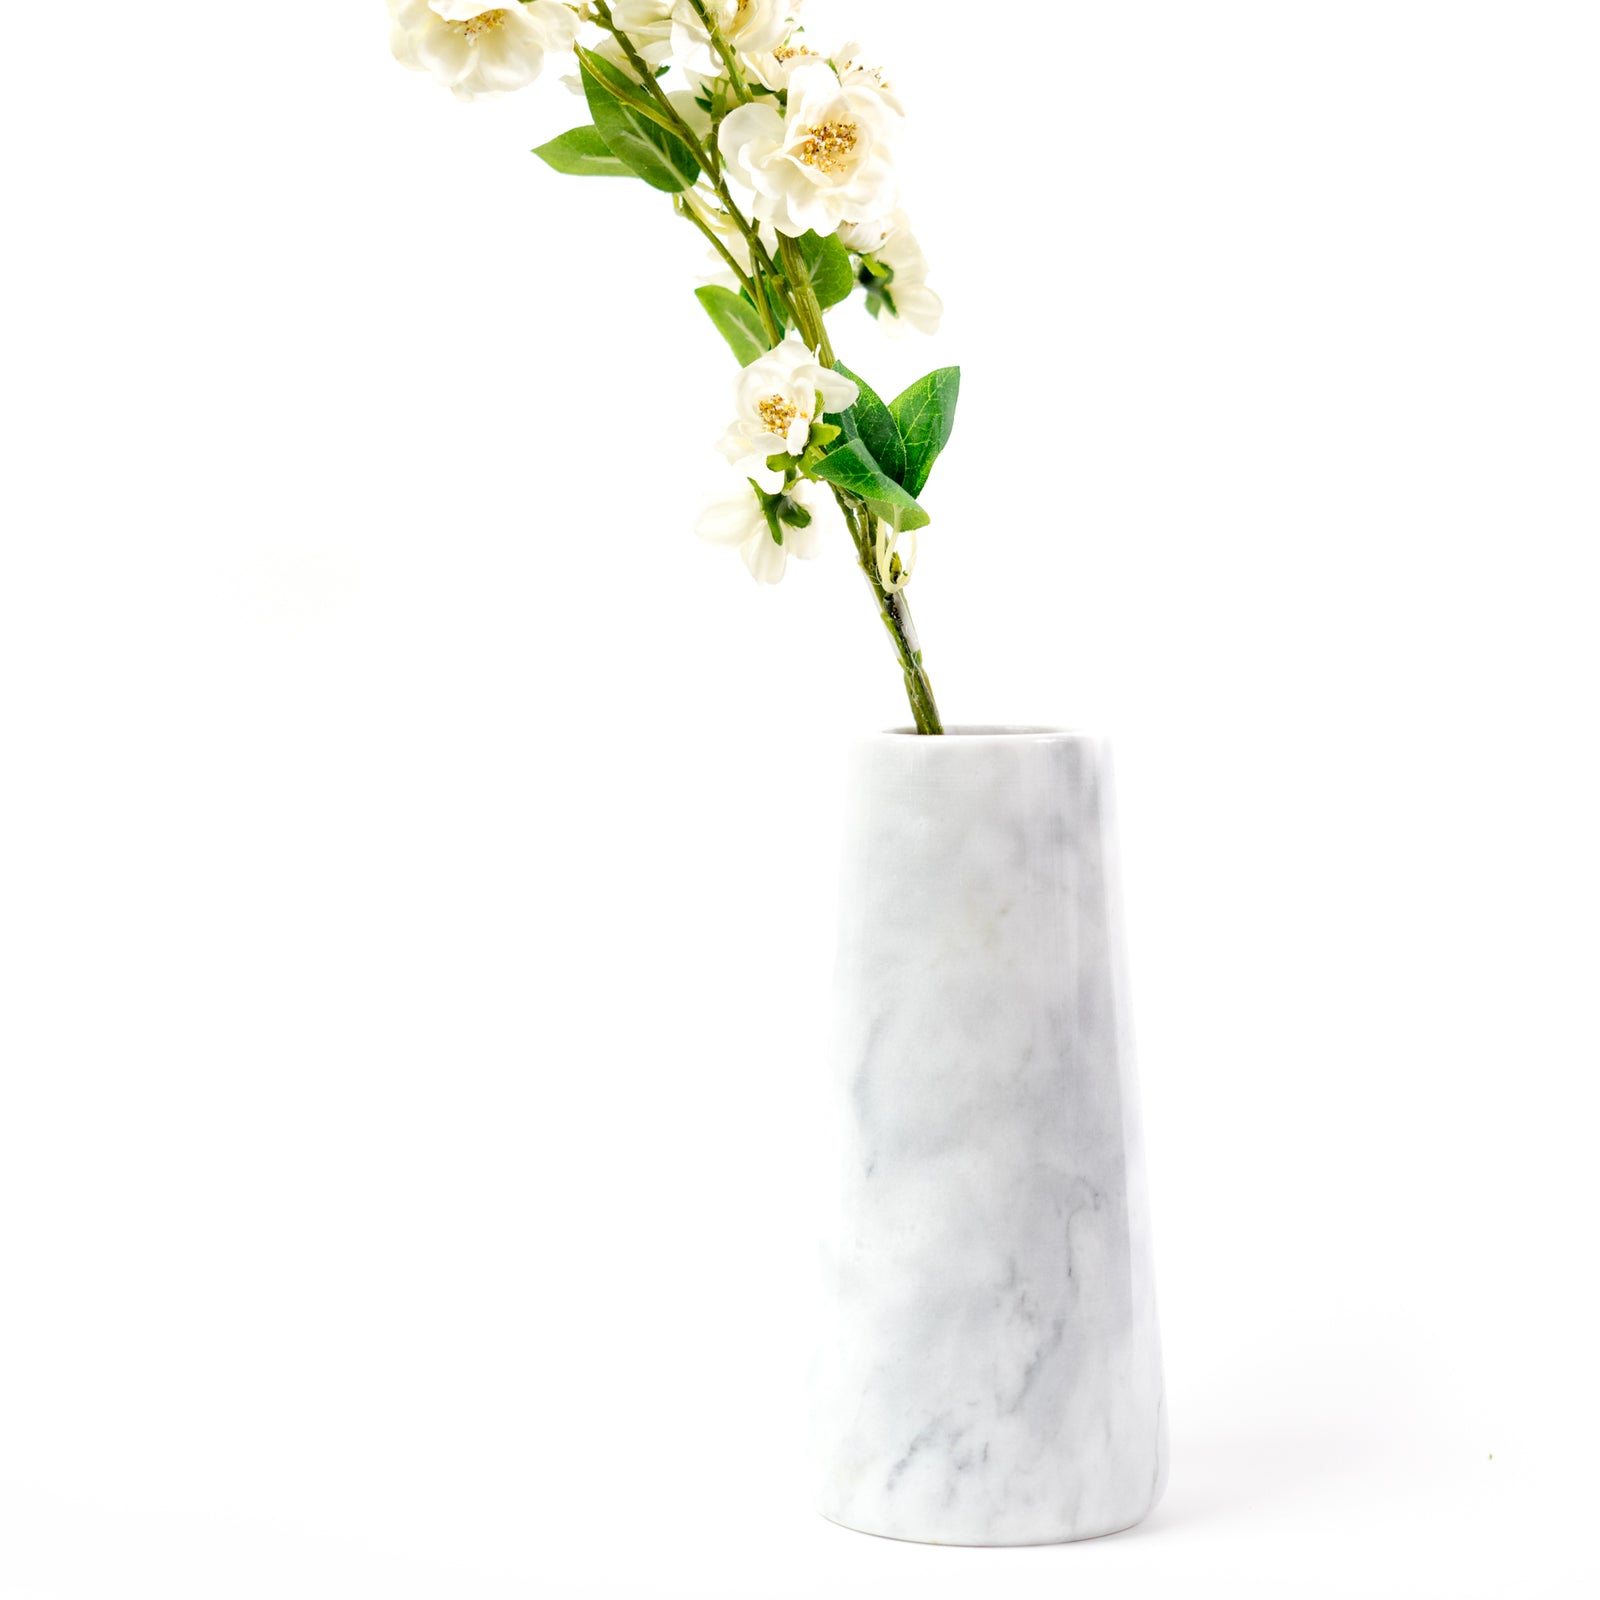 Iconic Marble Vase, 100% marble stone, handcrafted